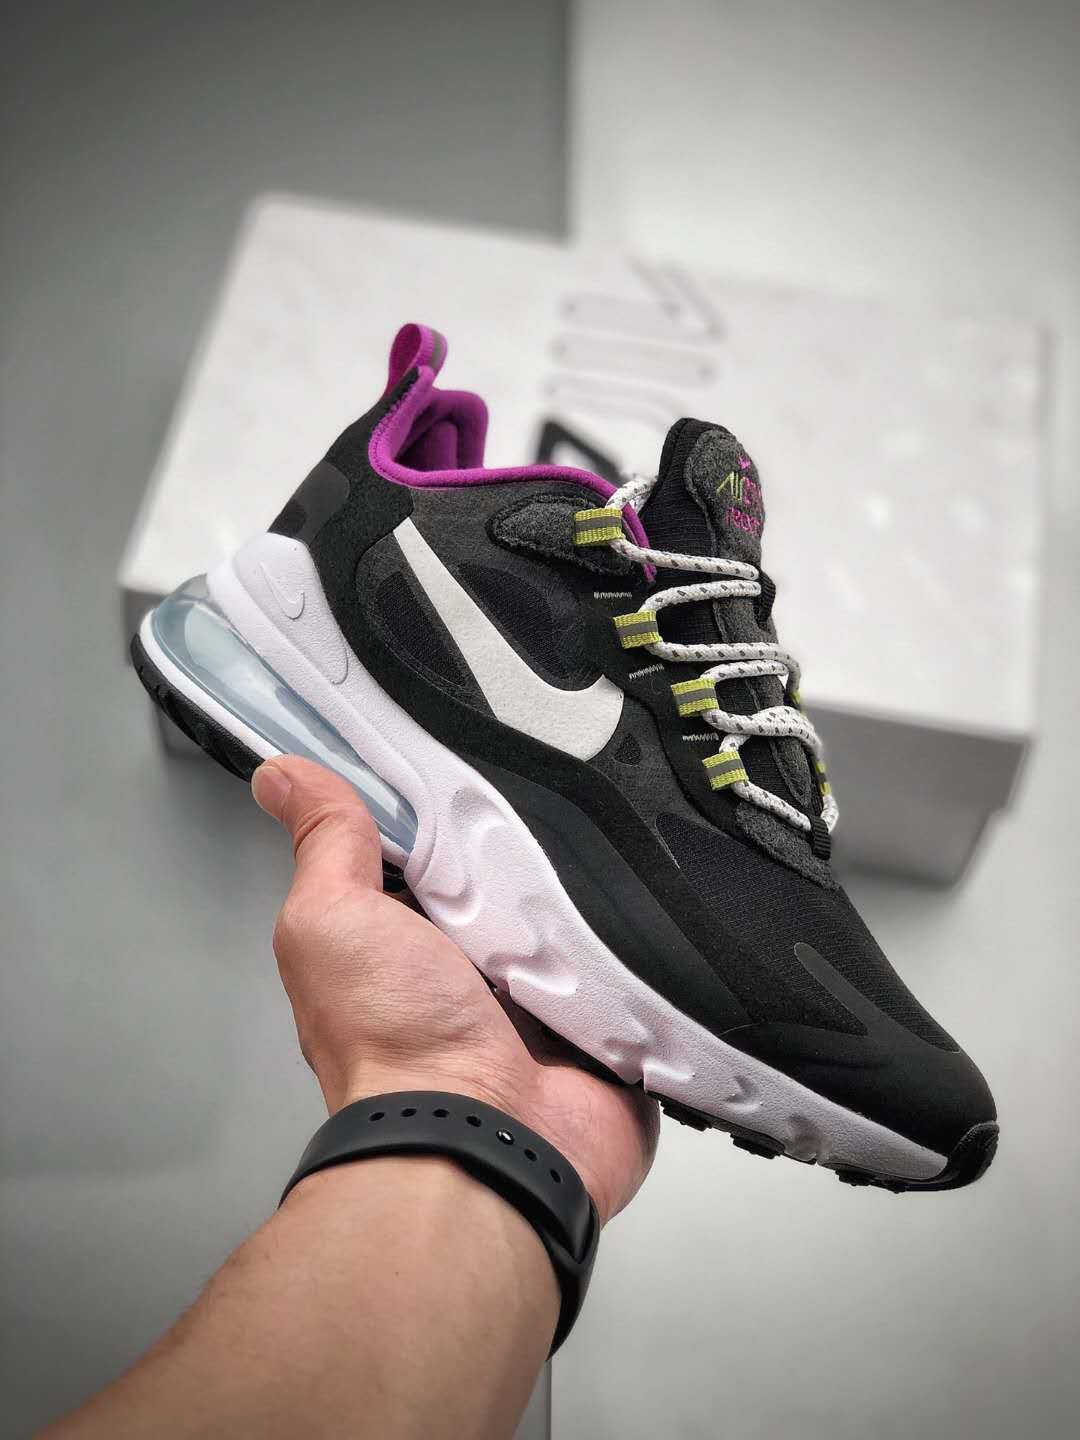 Nike Air Max 270 React Winter 'Total Orange' CD2049-006 - Stylish and Comfortable Winter Sneakers